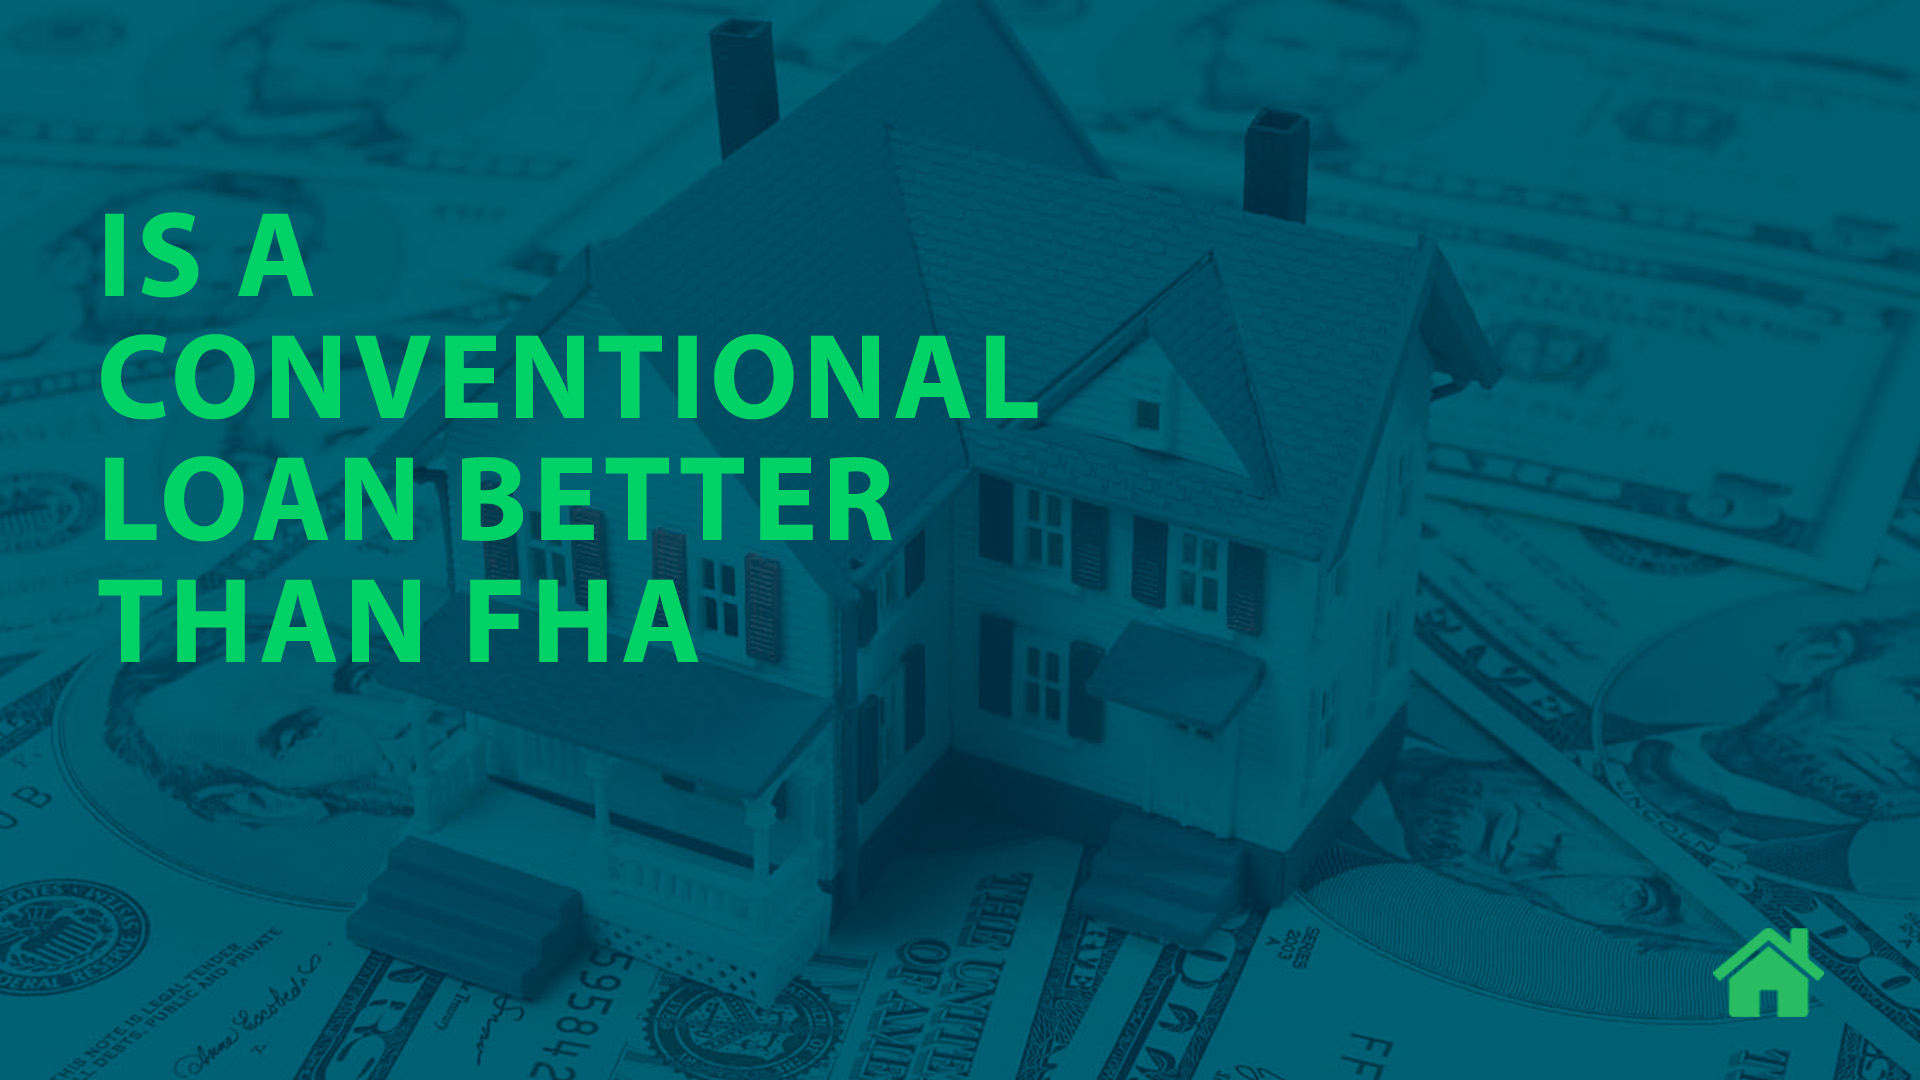 Is a conventional loan better than fha